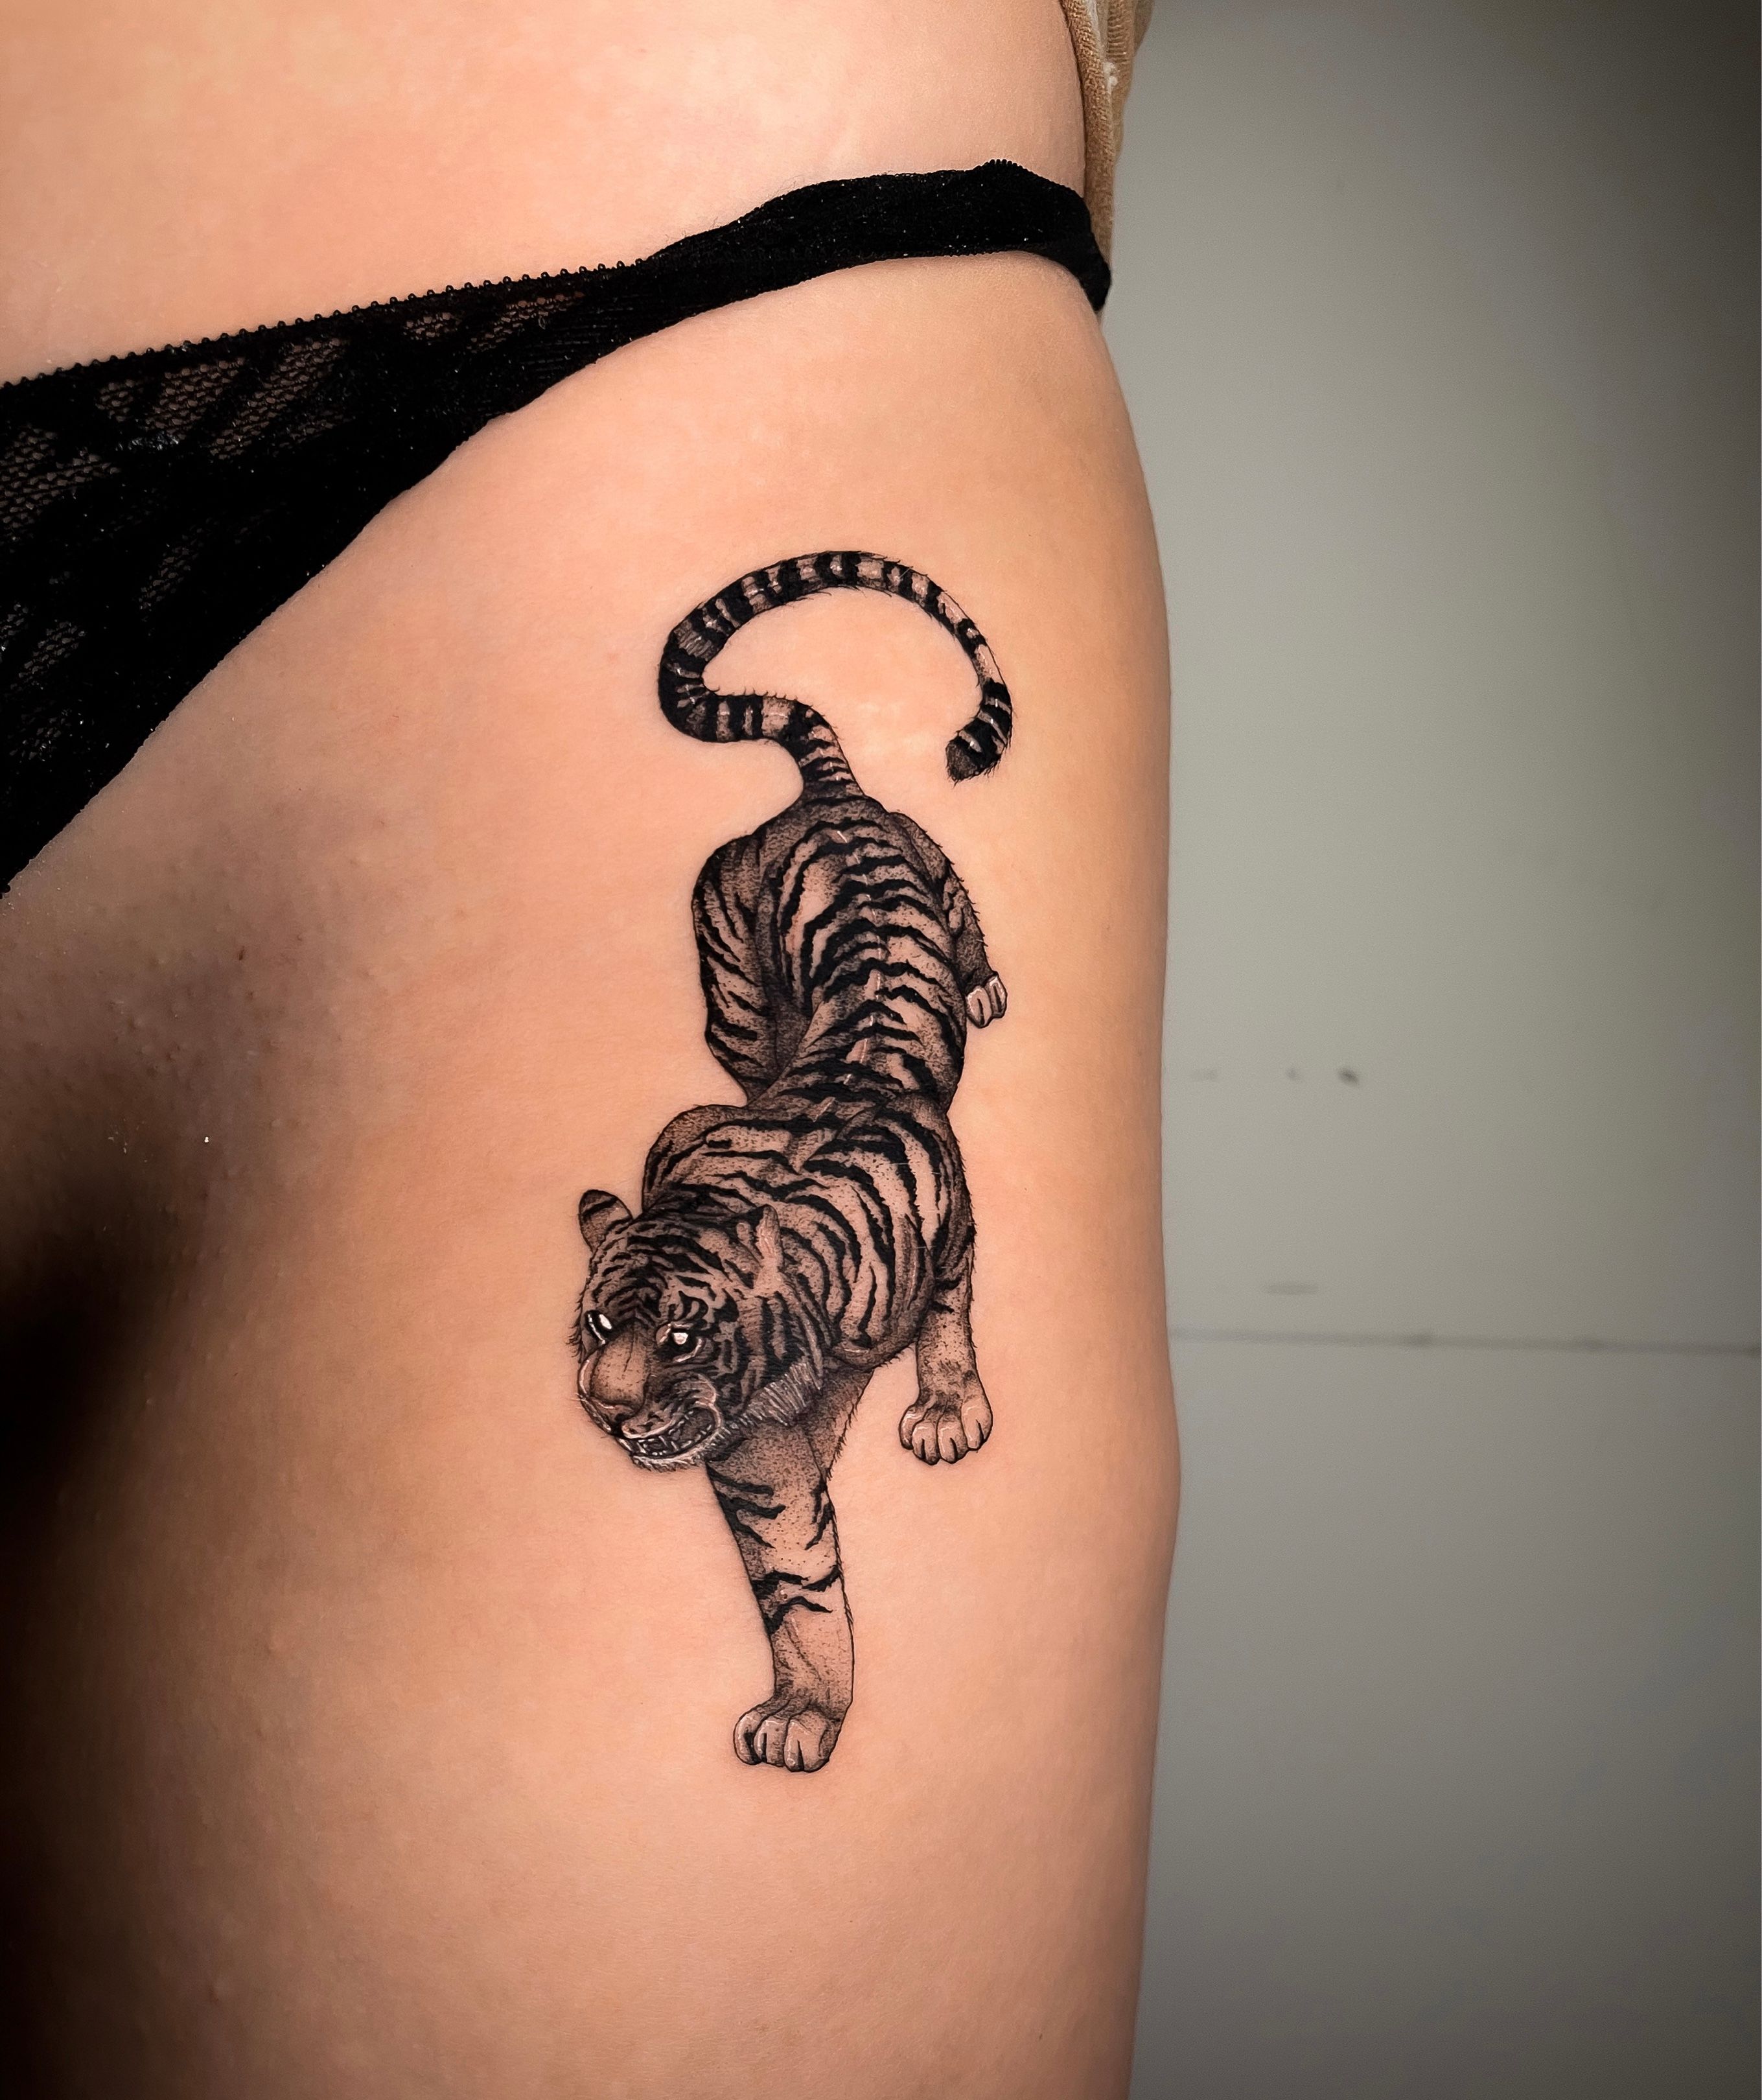 Tiger tattoo located on the hip